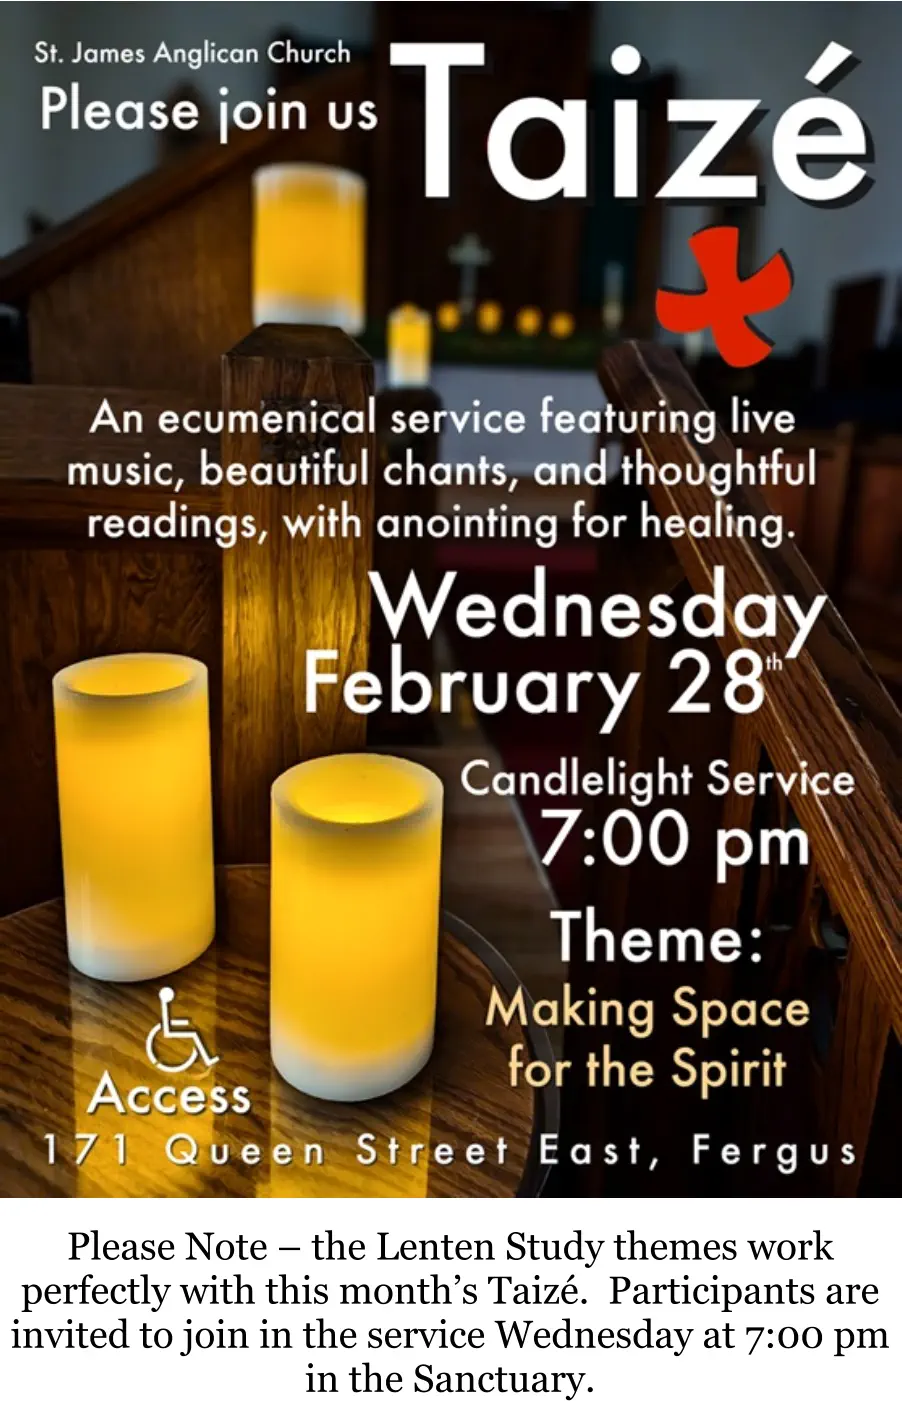 Please Note – the Lenten Study themes work perfectly with this month’s Taizé.  Participants are invited to join in the service Wednesday at 7:00 pm in the Sanctuary.